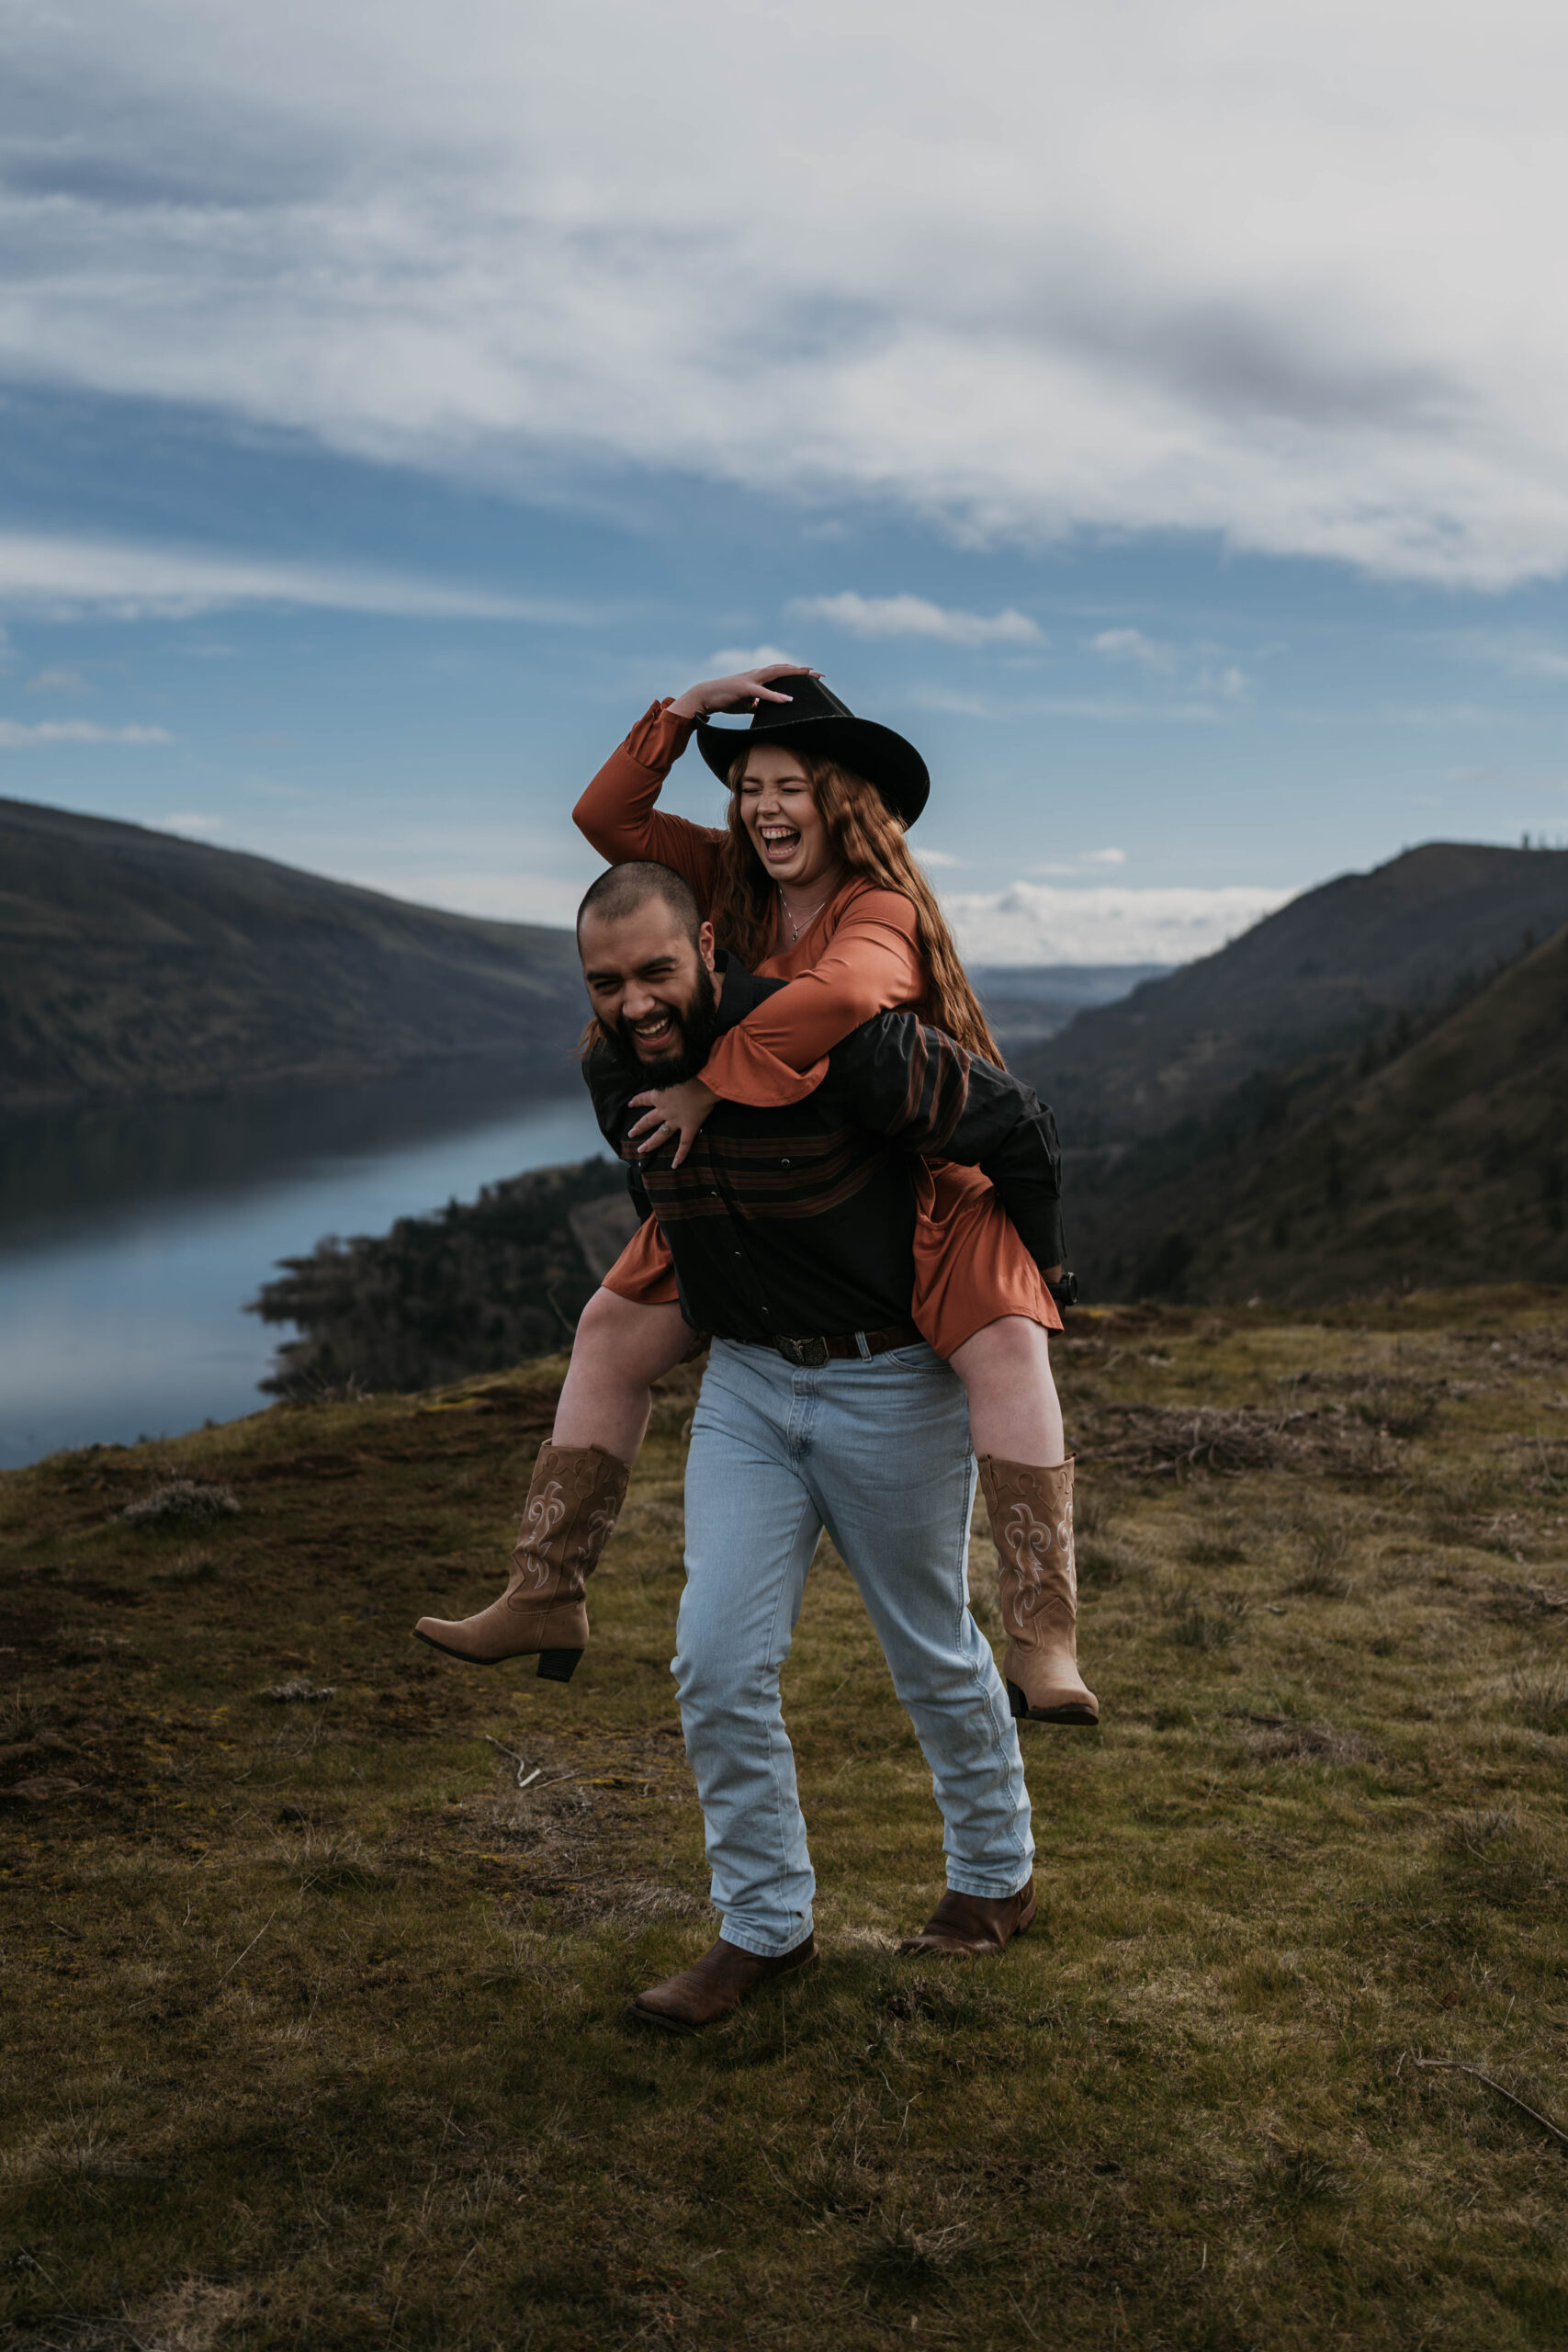 couple doing a piggy back ride in western attire with mountains and river in background